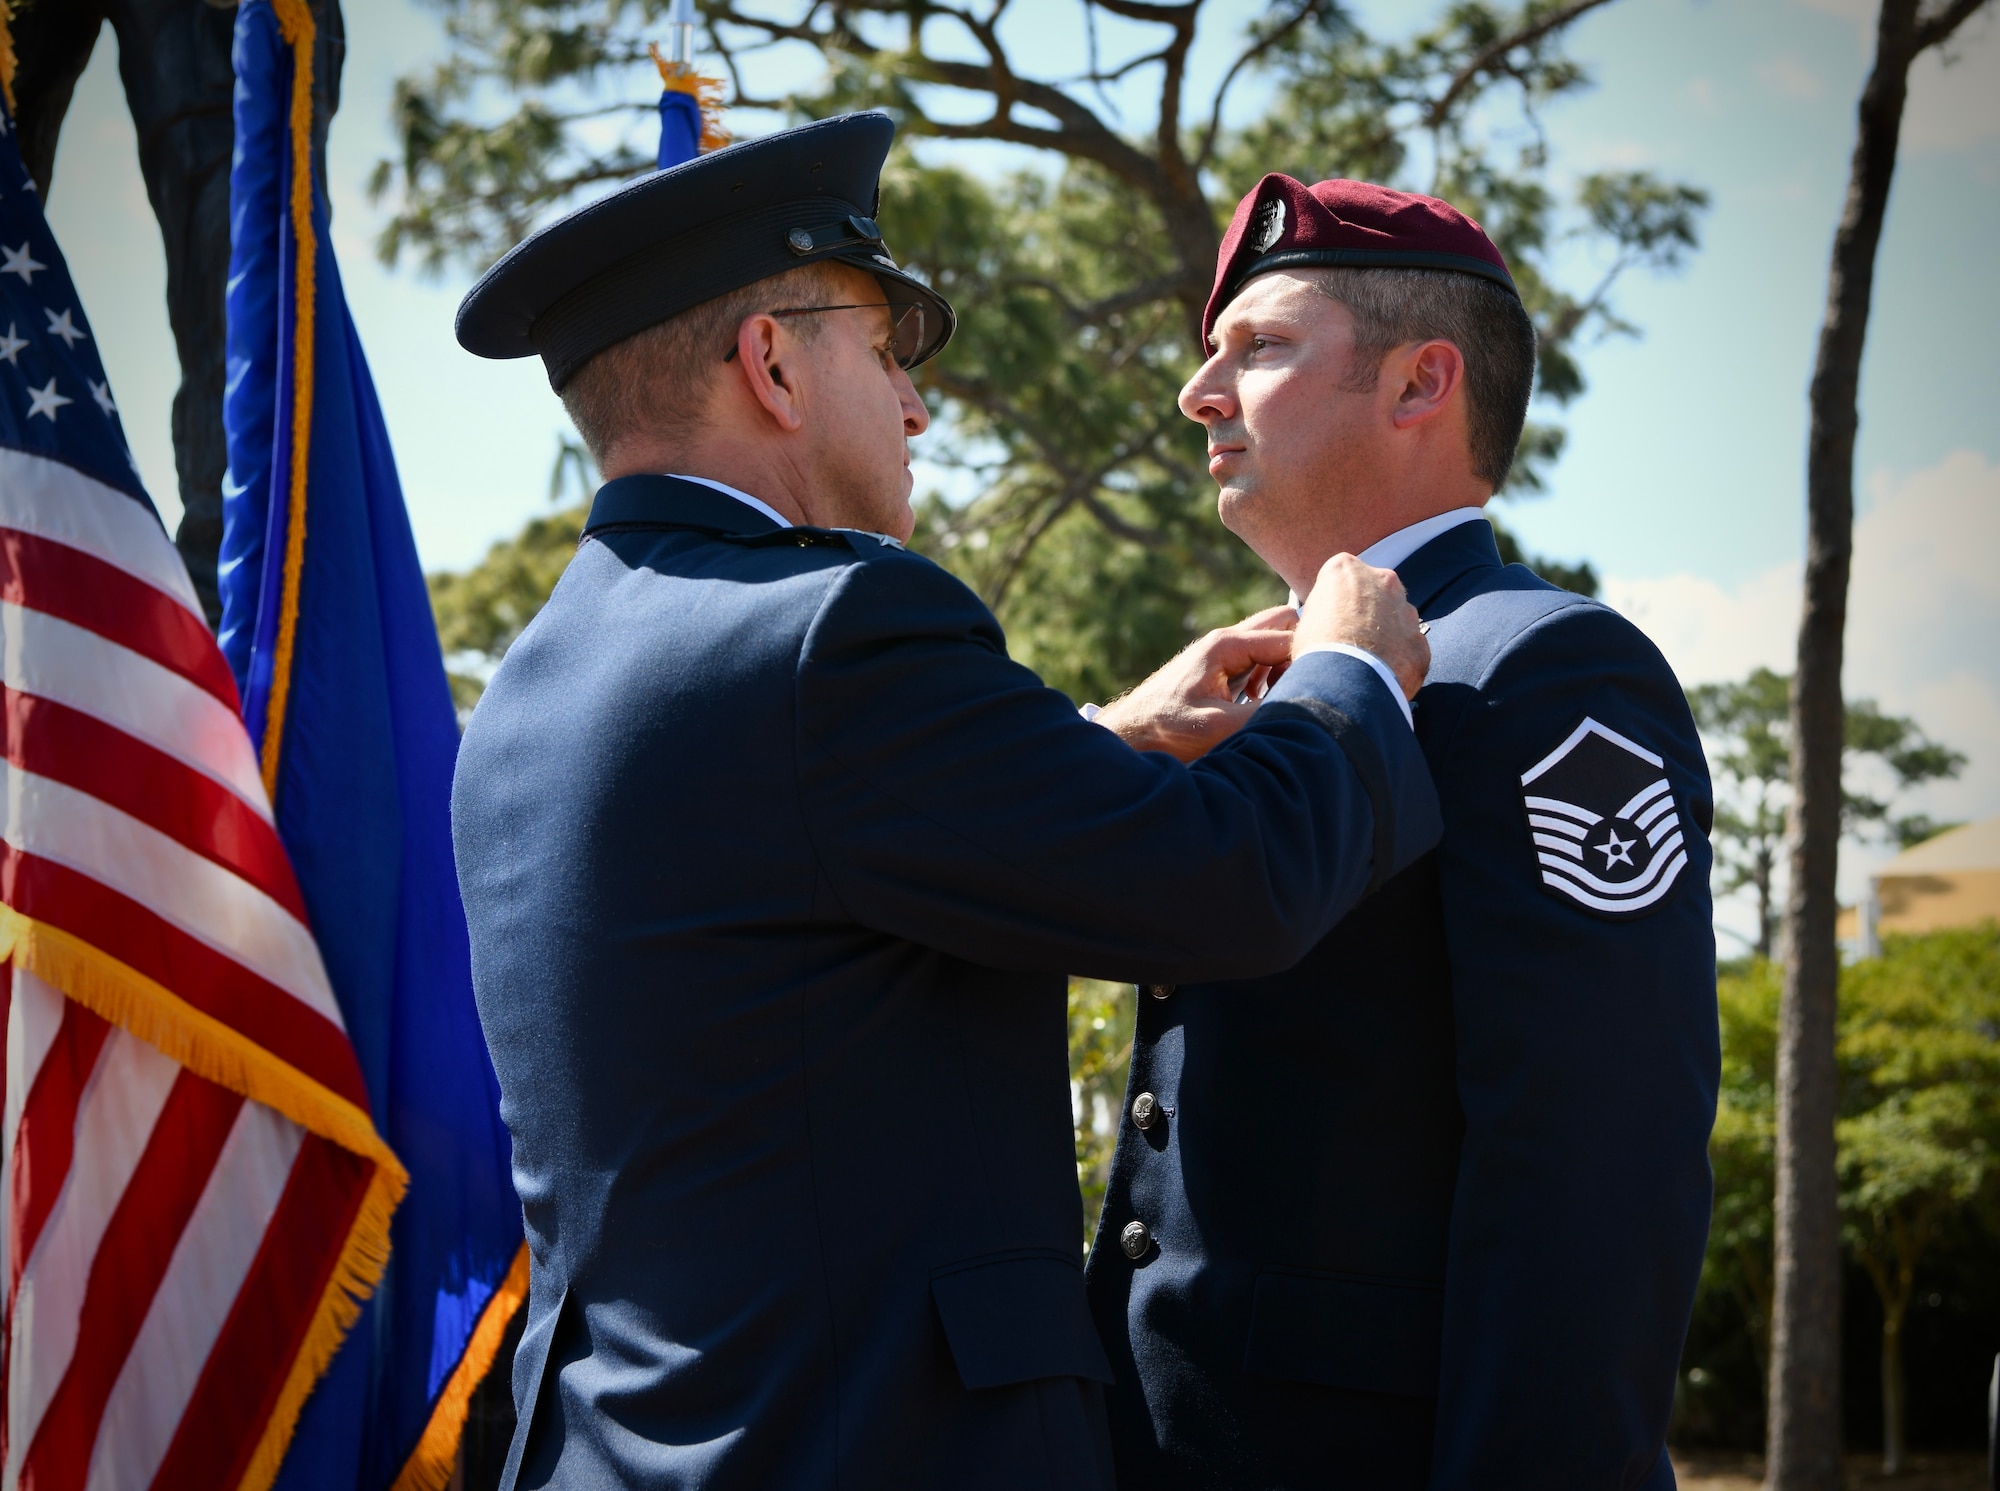 U.S. Air Force Lt. Gen. Jim Slife, commander of Air Force Special Operations Command, presents the Silver Star Medal to Master Sgt. Cory Haggett, a special tactics operator with the 23d Special Tactics Squadron, 24th Special Operations Wing, during a ceremony May 13, 2022, at Hurlburt Field, Fla.  The Silver Star is the third-highest military combat decoration that can be awarded to a member of the United States Armed Forces.